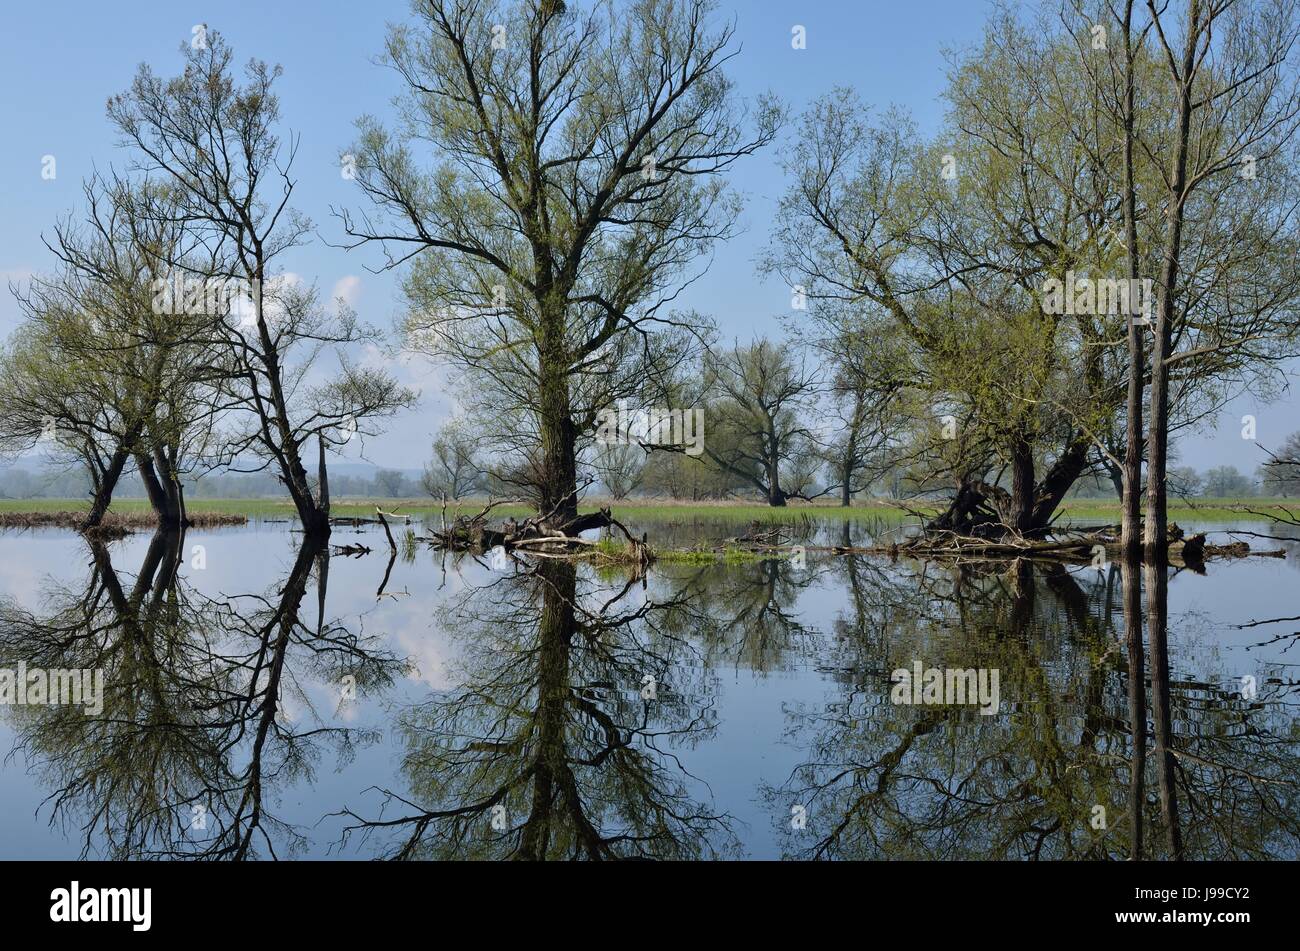 tree, trees, conservation of nature, mirroring, flooded, germany, german Stock Photo